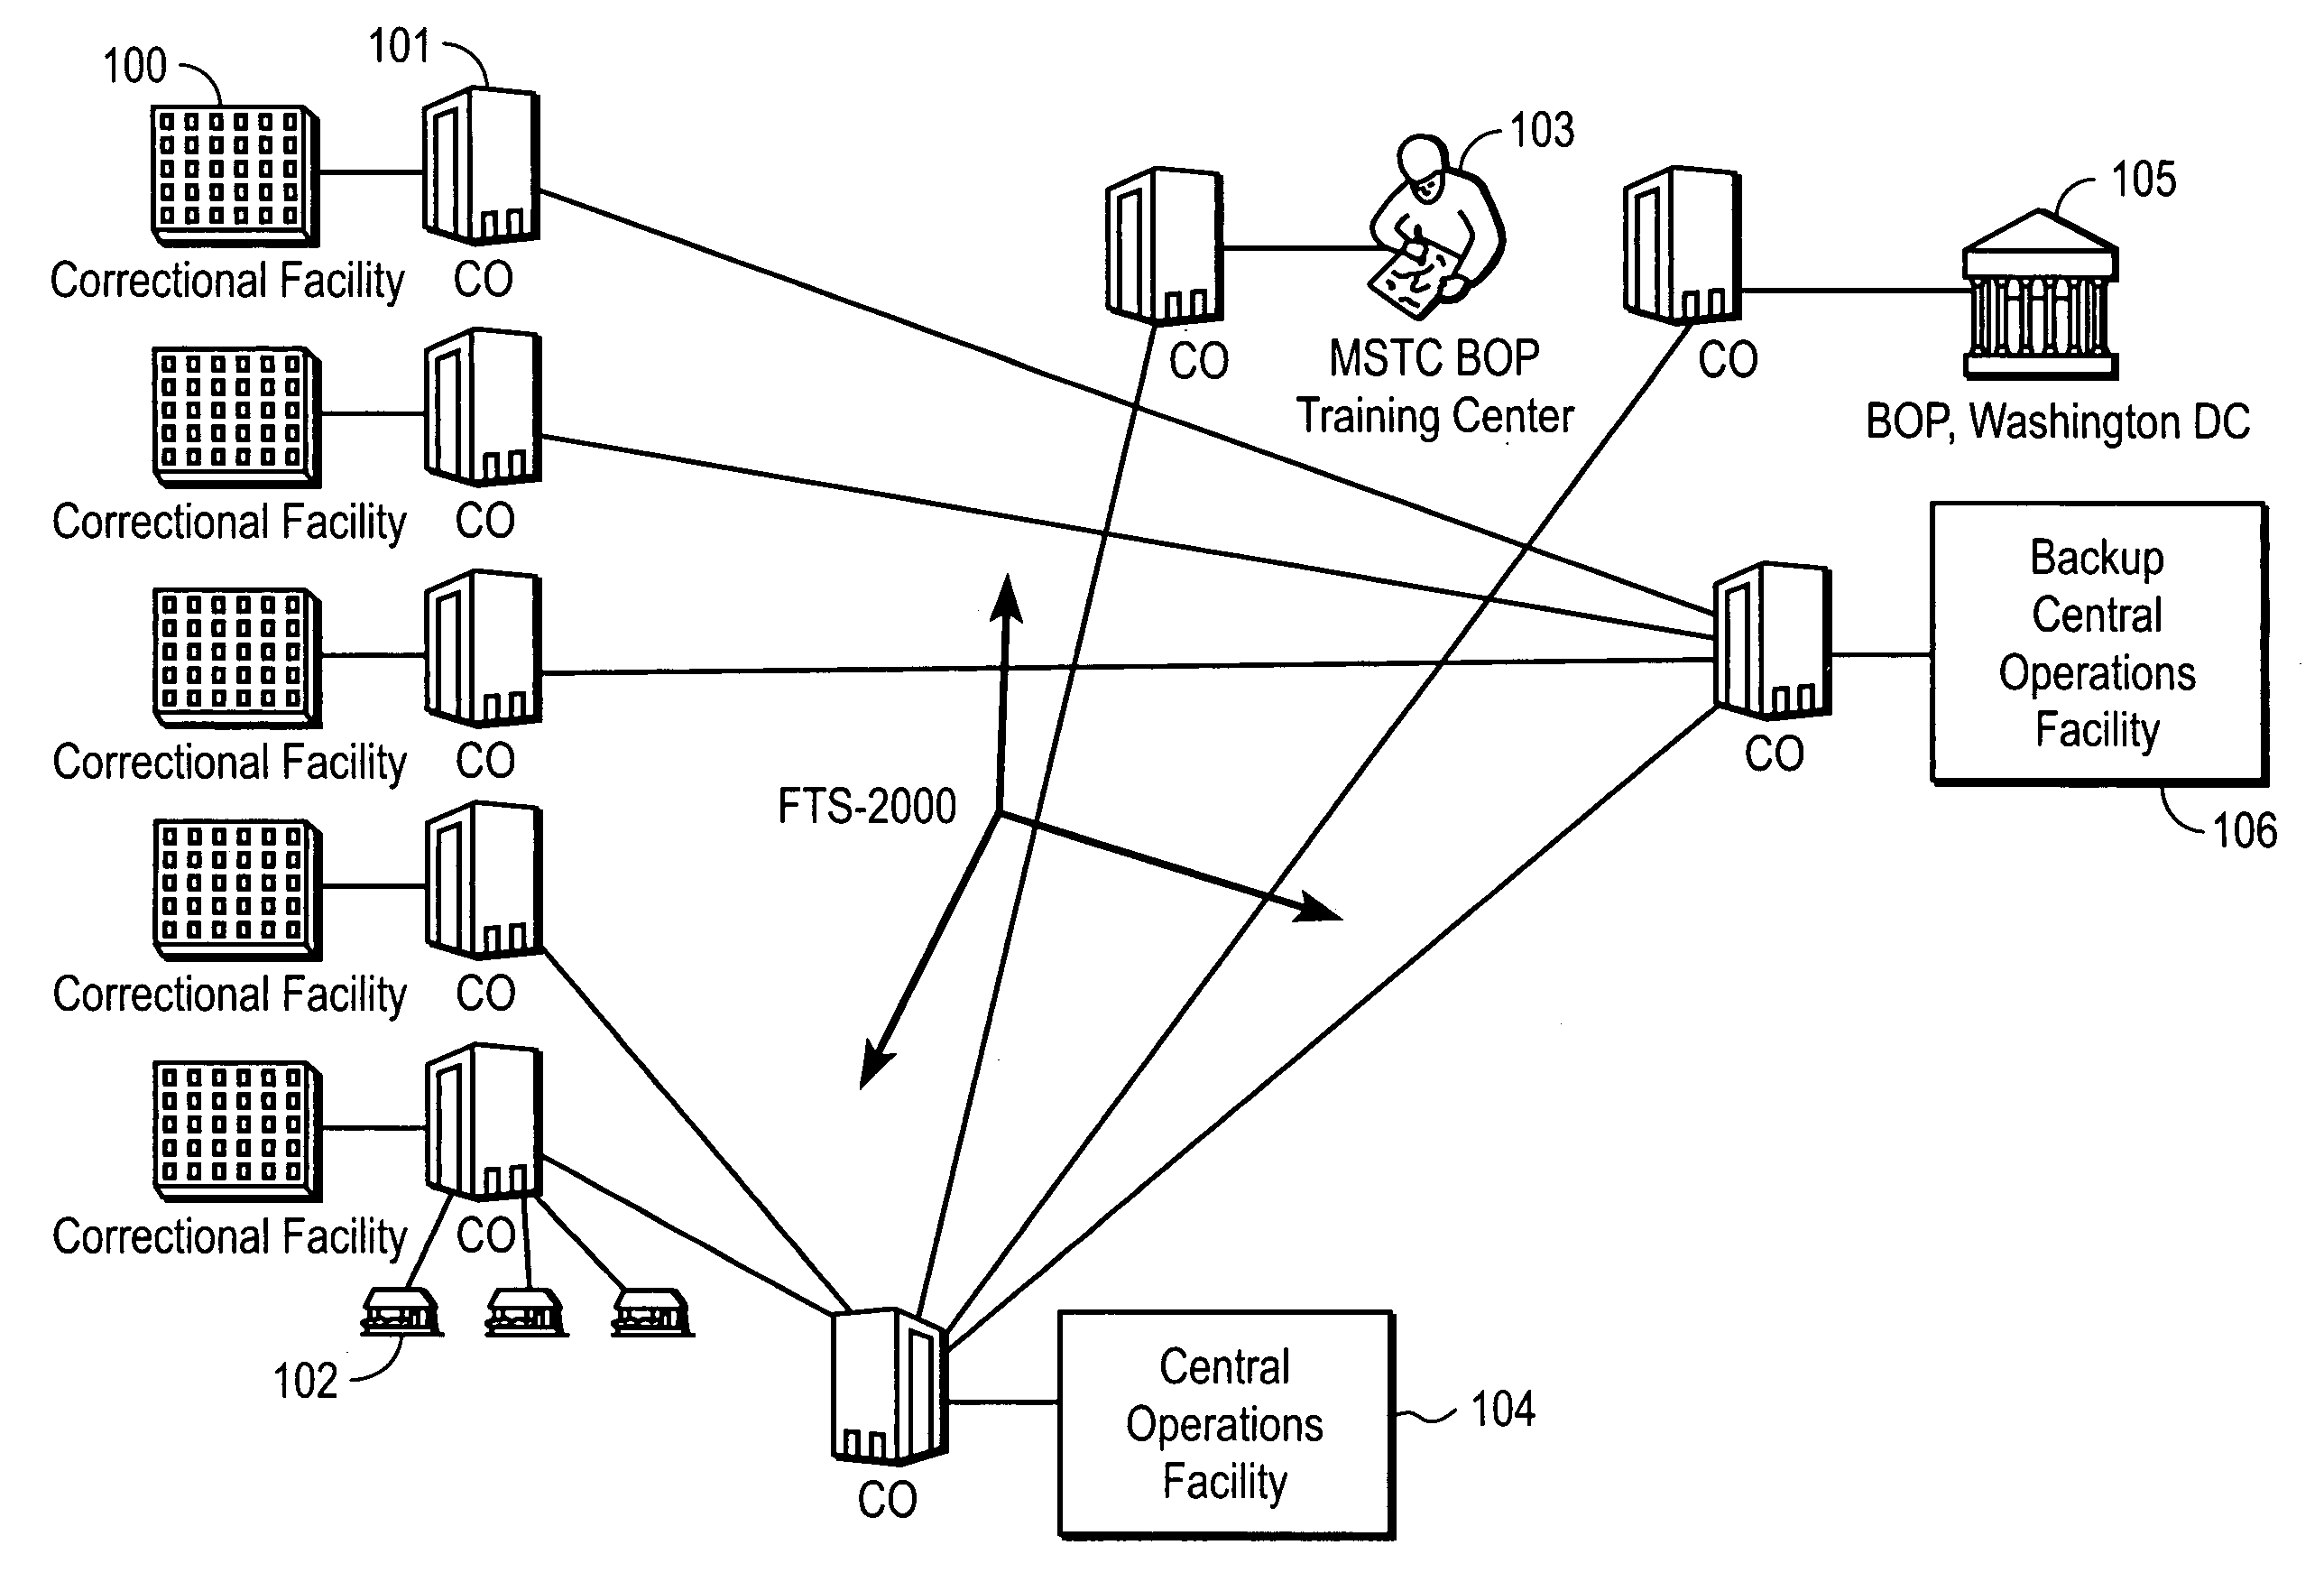 Computer-based method and apparatus for controlling, monitoring, recording and reporting telephone access